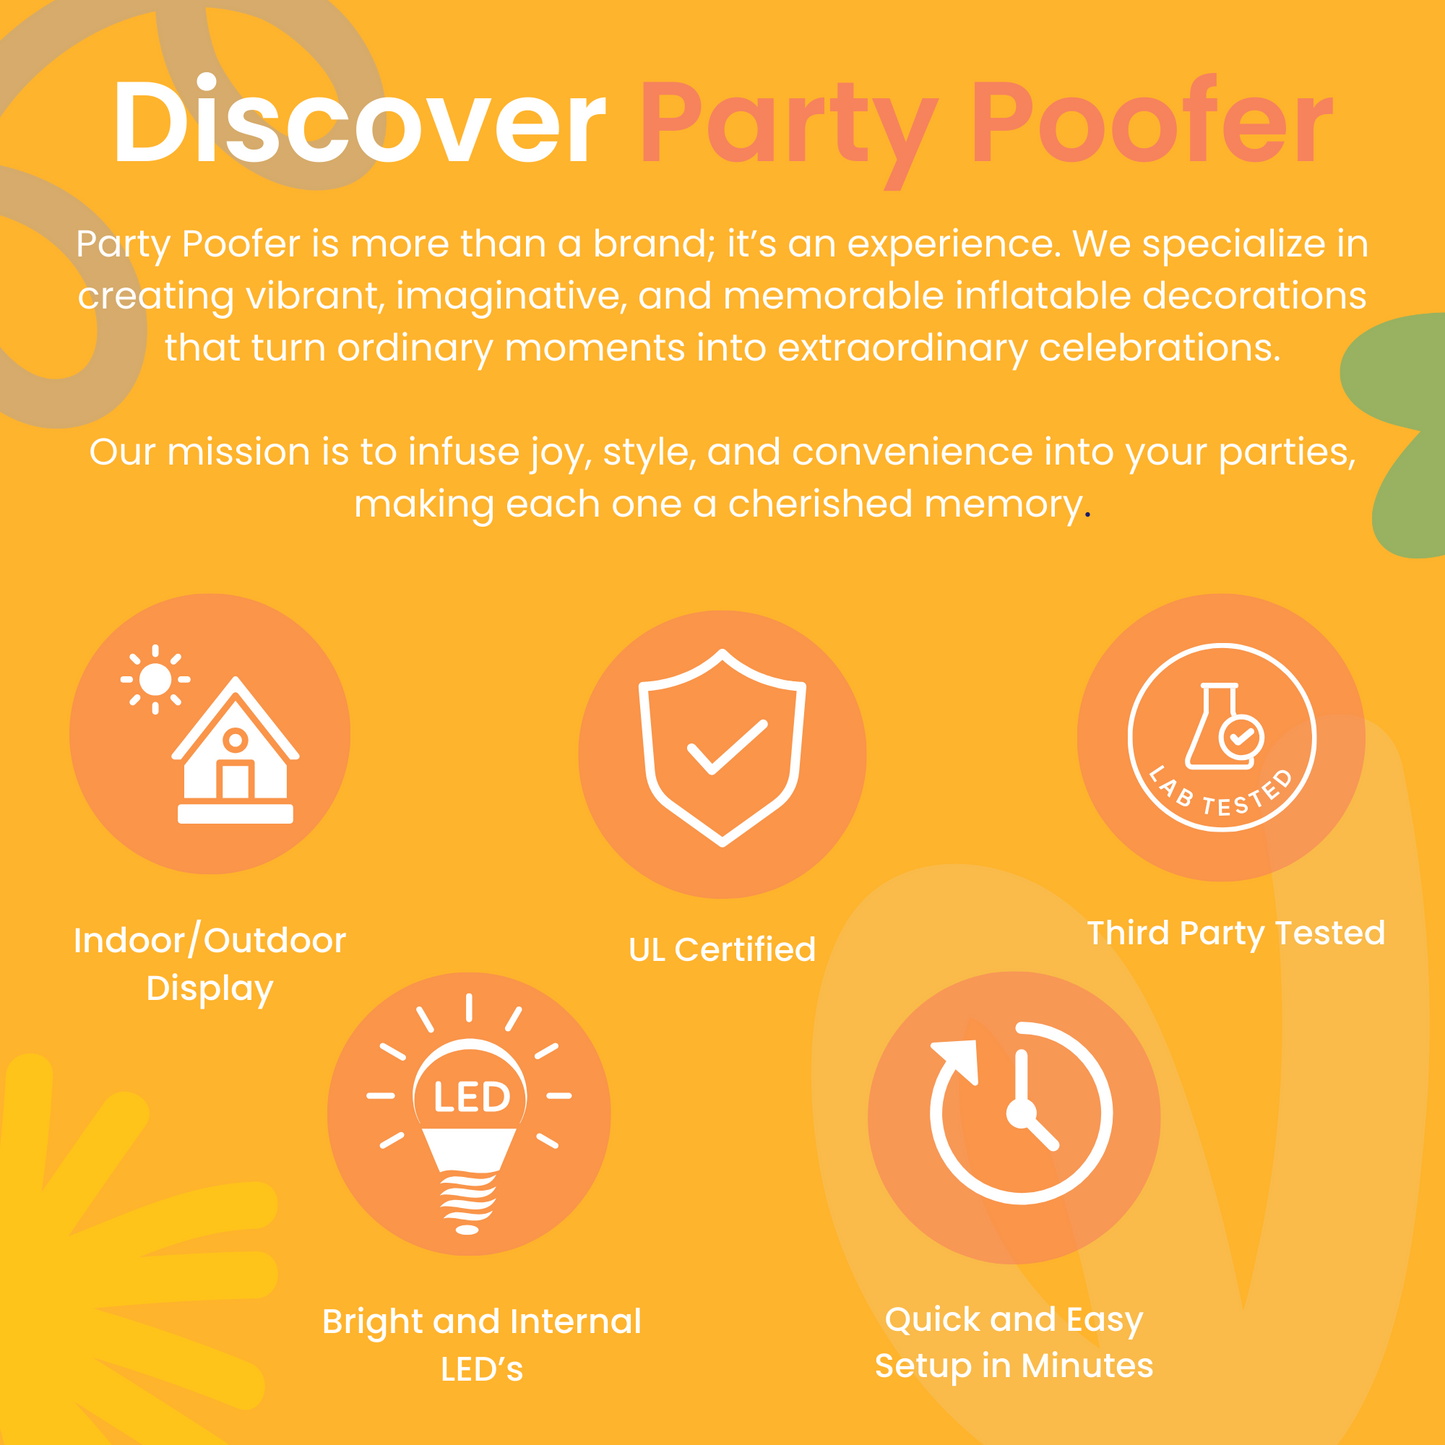 Discover Party Poofer Black Champagne Blow-Up Party Decorations Claims